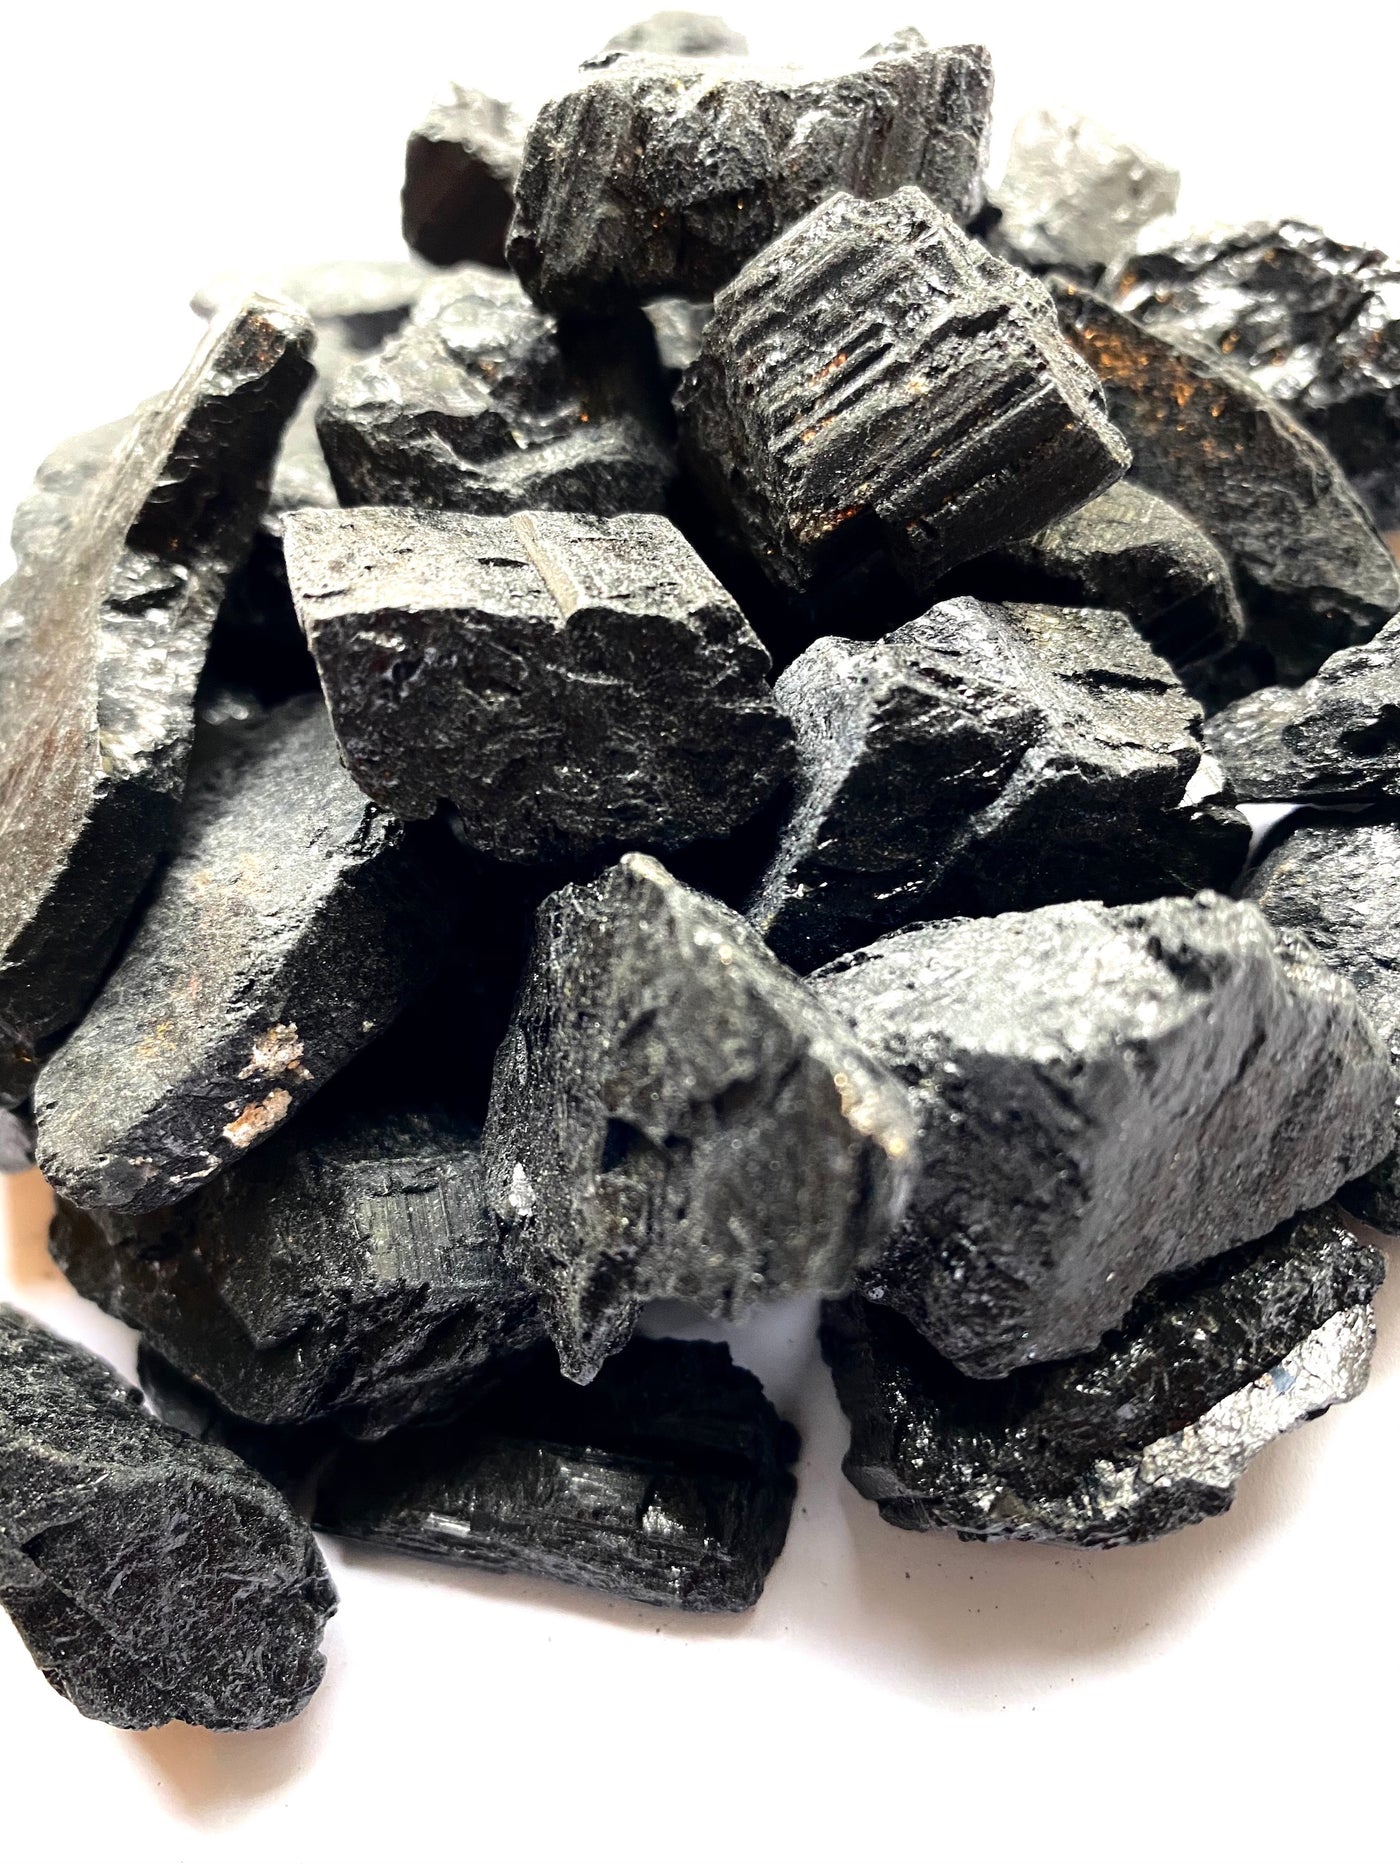 Rugged black tourmaline crystals, known for their protective energy, offering a sense of grounding and stability to any space.